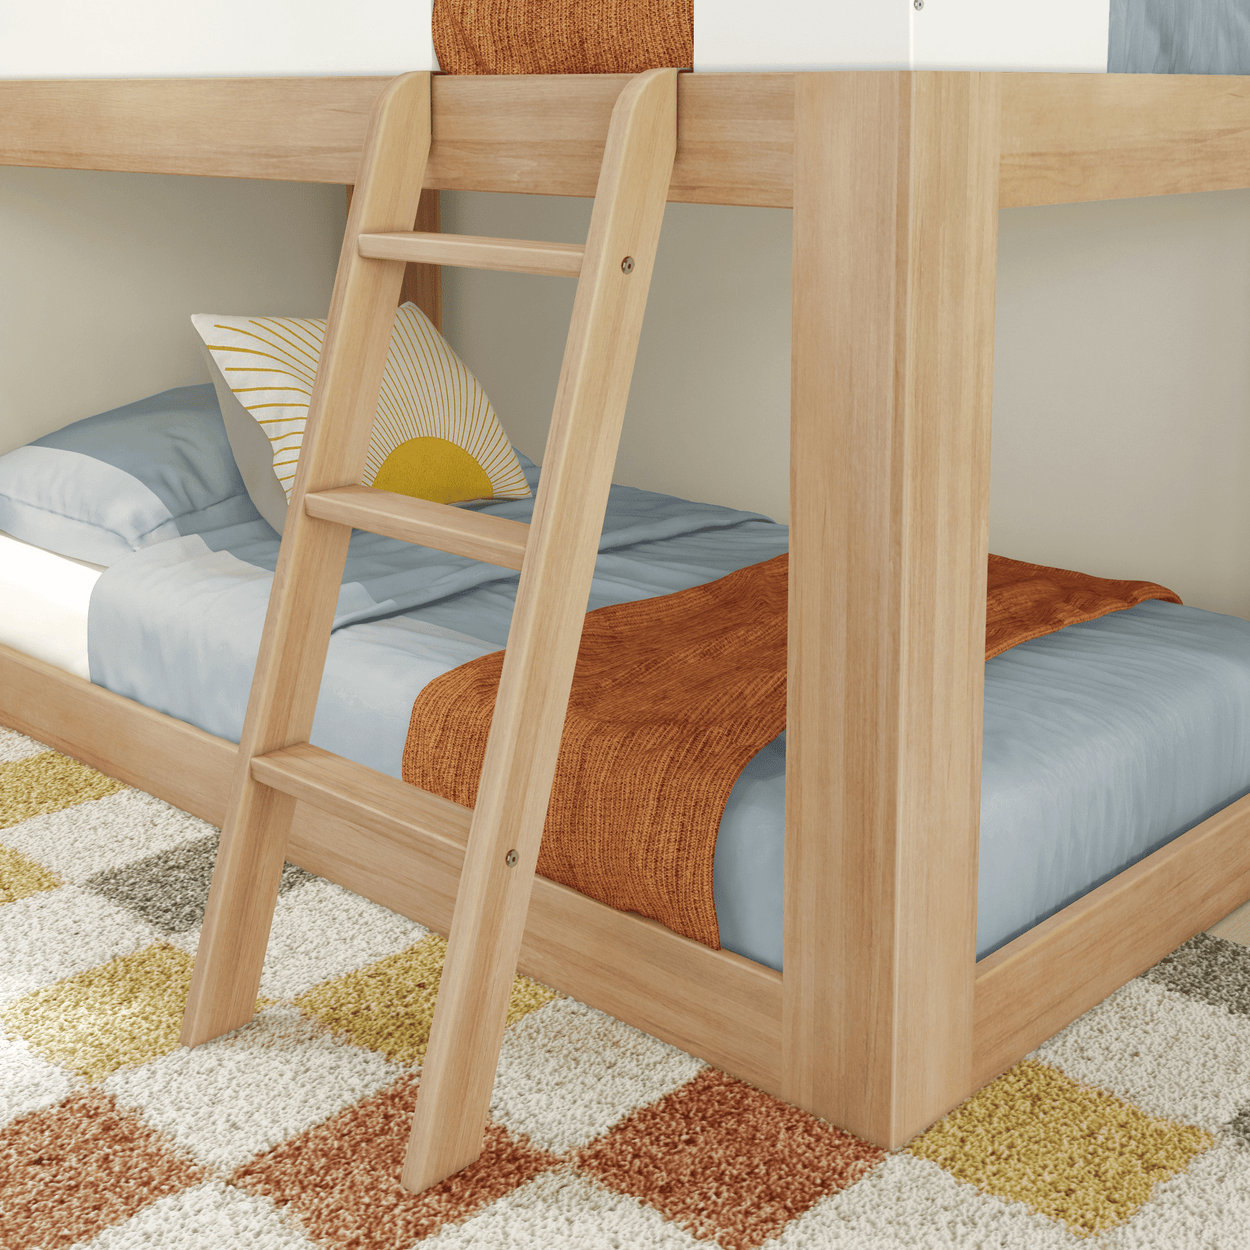 200214-520 : Bunk Beds Mid-Century Modern Twin Low Bunk, White/Blonde